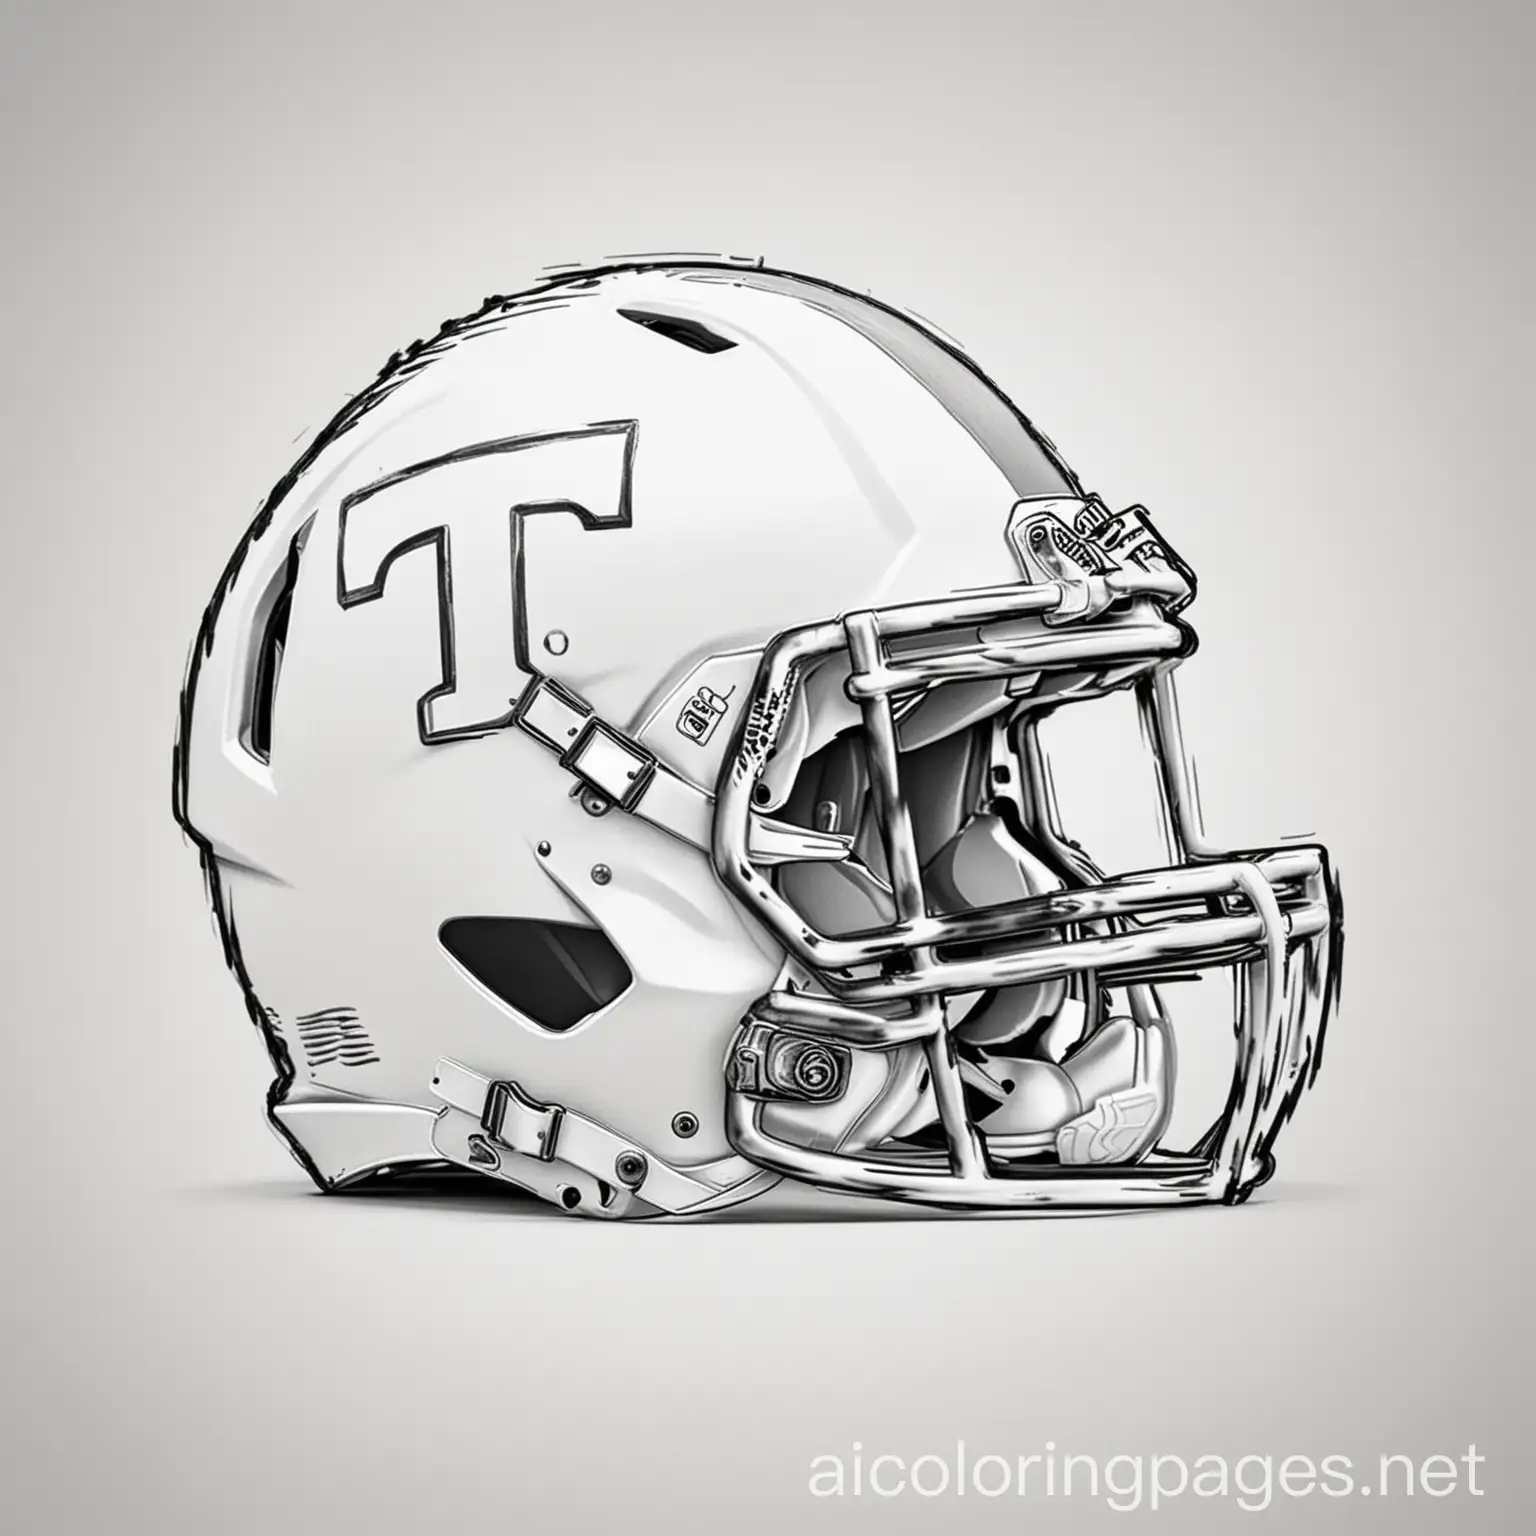 tennessee vols football helmet, Coloring Page, black and white, line art, white background, Simplicity, Ample White Space. The background of the coloring page is plain white to make it easy for young children to color within the lines. The outlines of all the subjects are easy to distinguish, making it simple for kids to color without too much difficulty